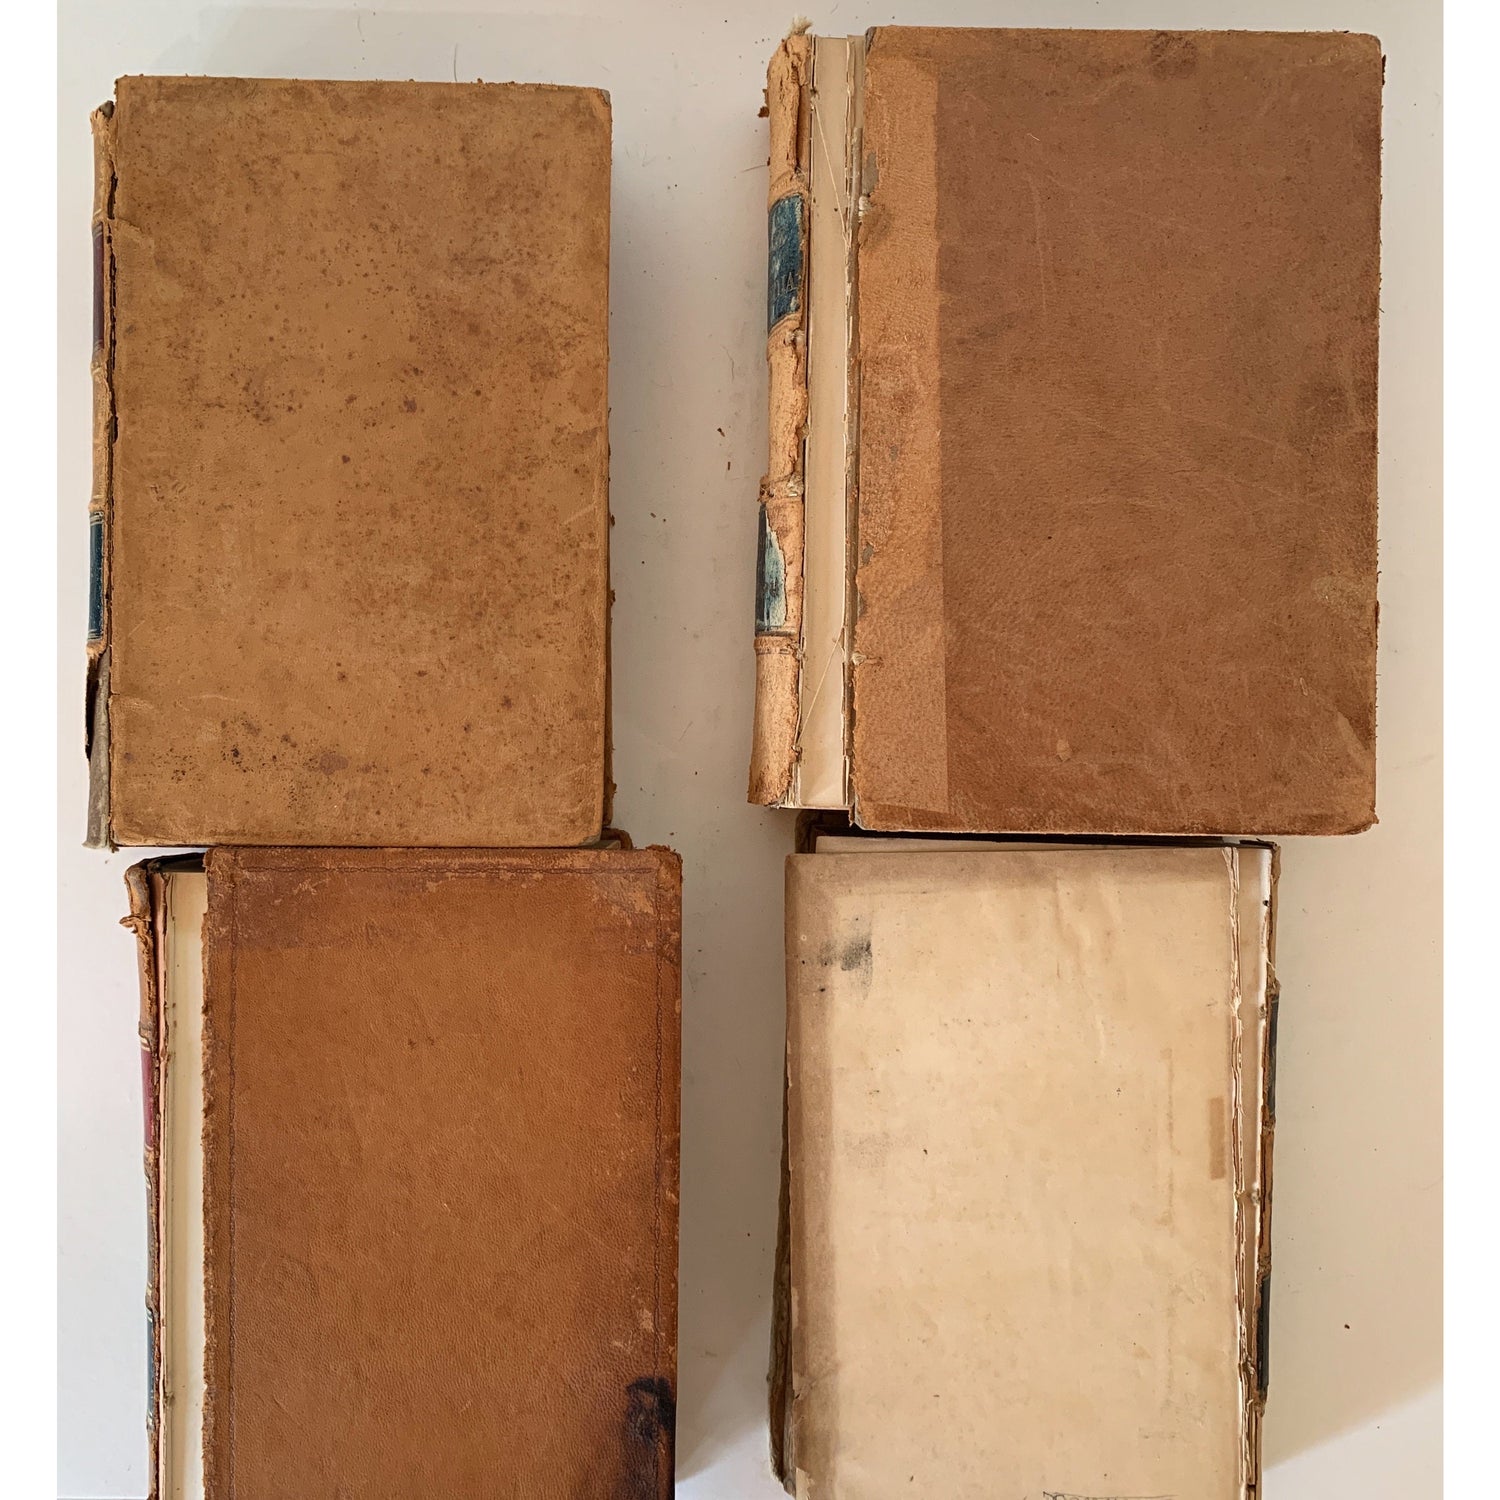 Antique Leather Distressed Books for Shelf Styling, Old Books